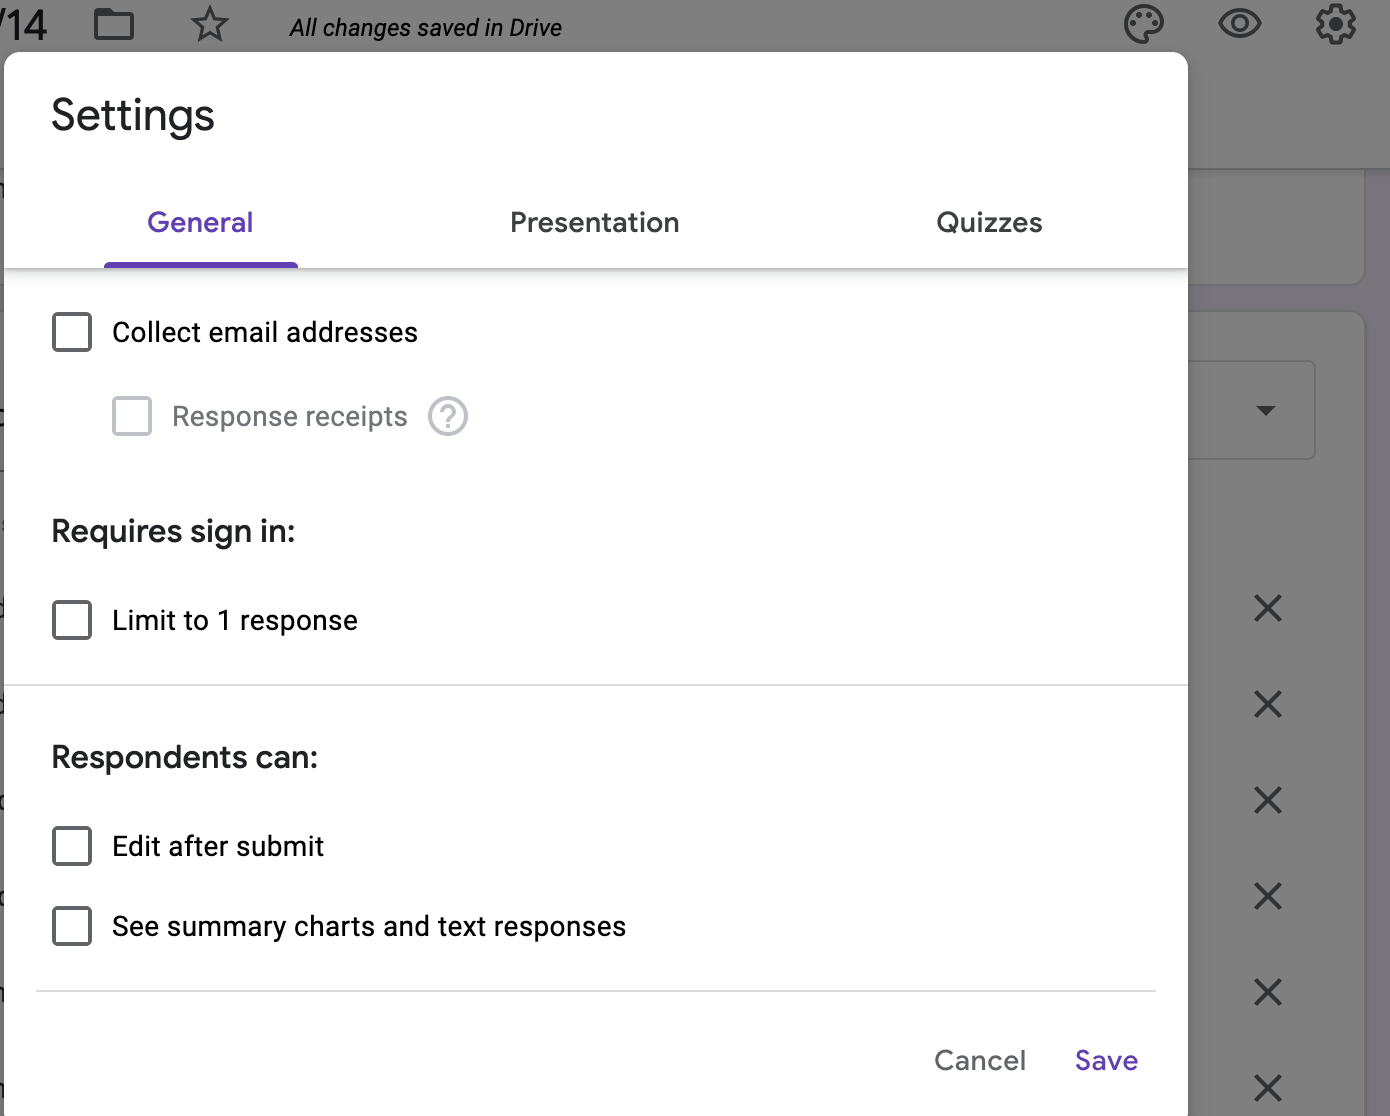 Image of the settings menu in Google Forms